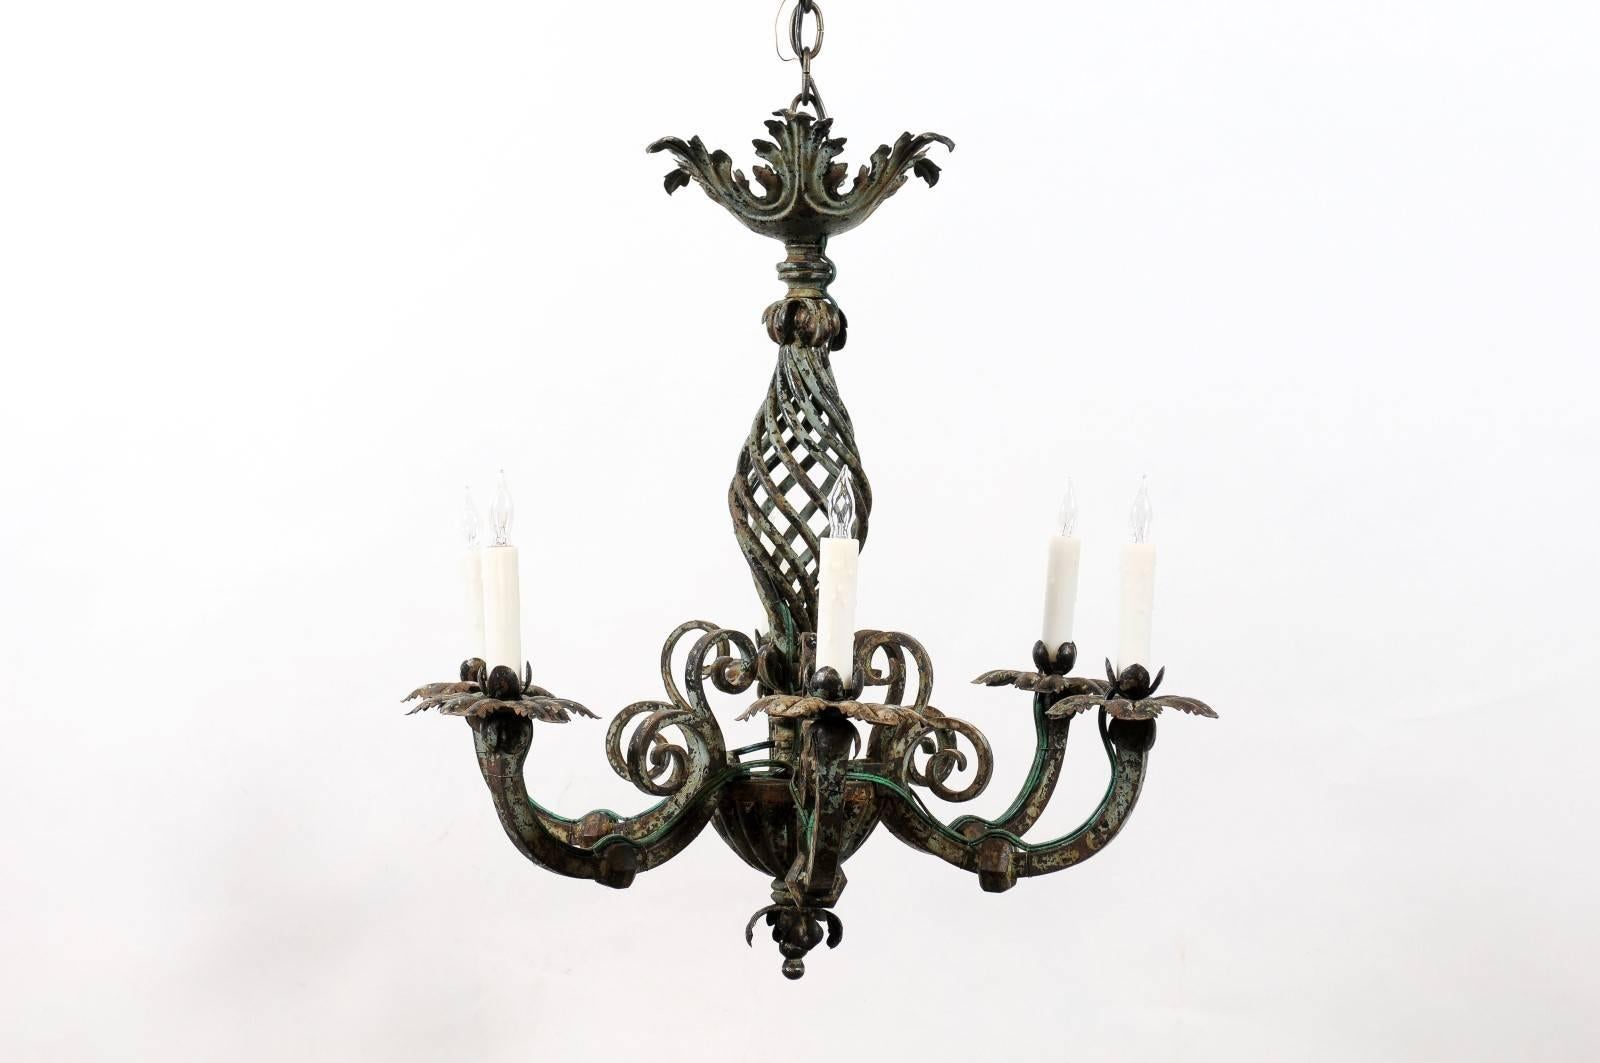 Late 19th Century French Iron Painted Chandelier with Scroll Detail and Six Lights, circa 1890